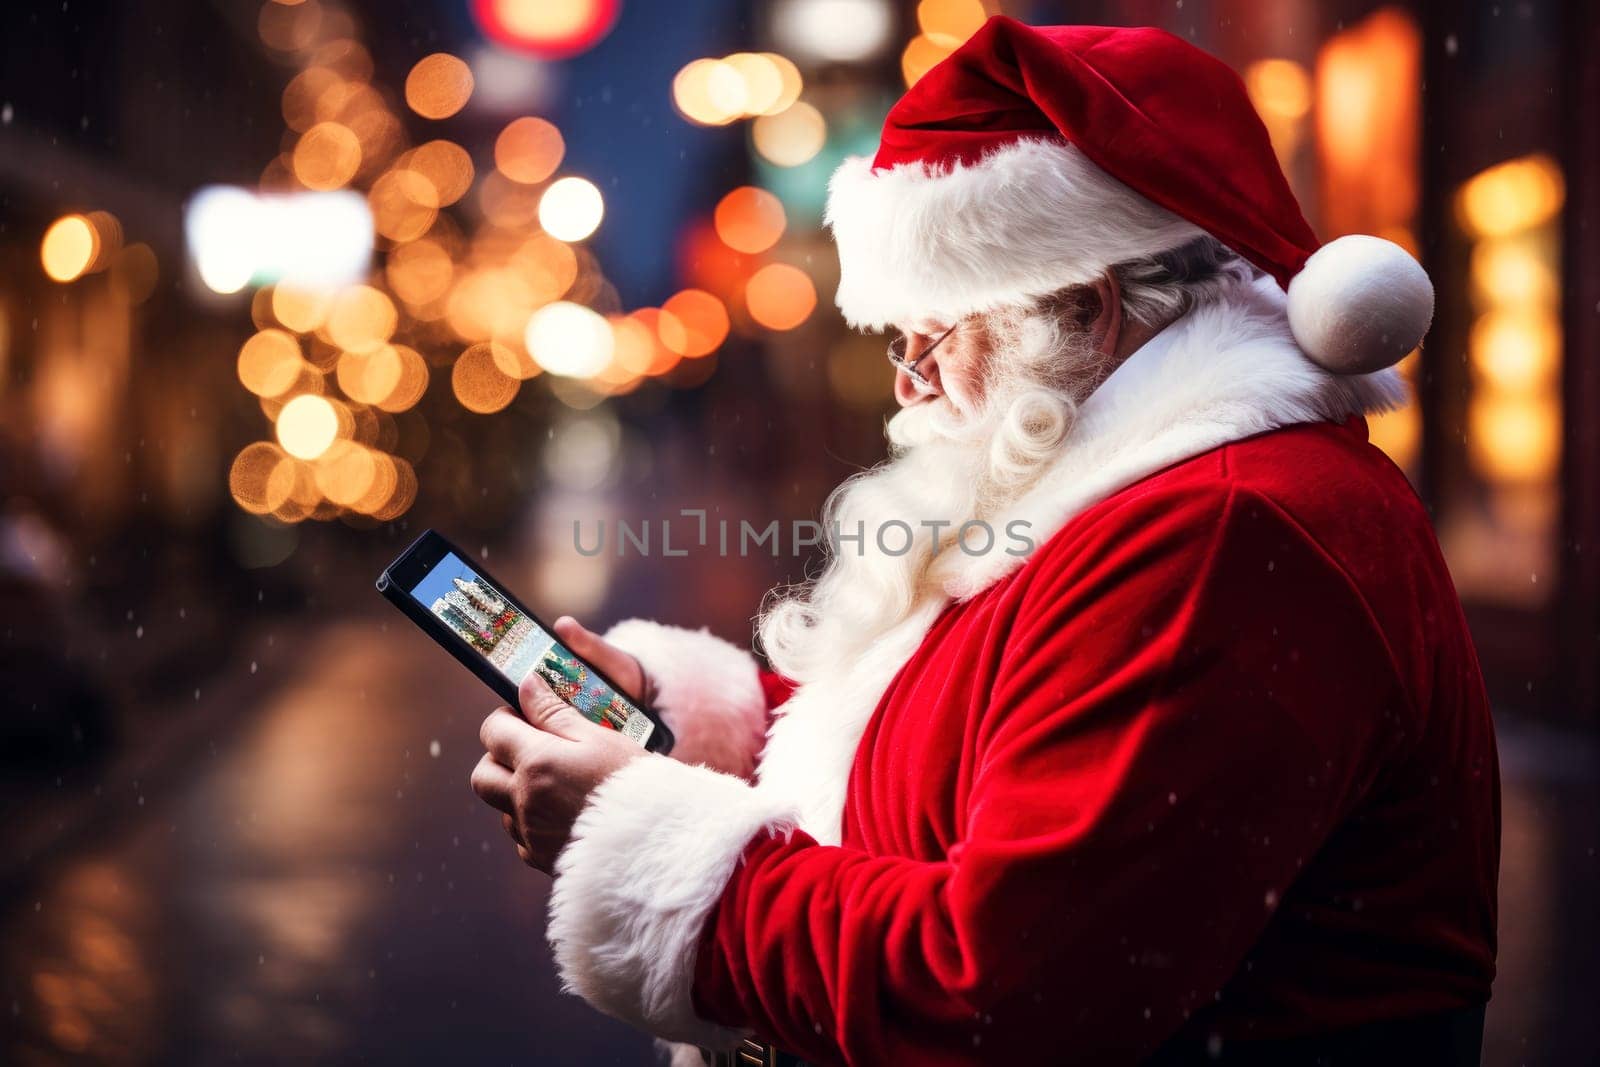 Santa Claus uses a smartphone to order gifts and use GPS to find addresses by andreyz